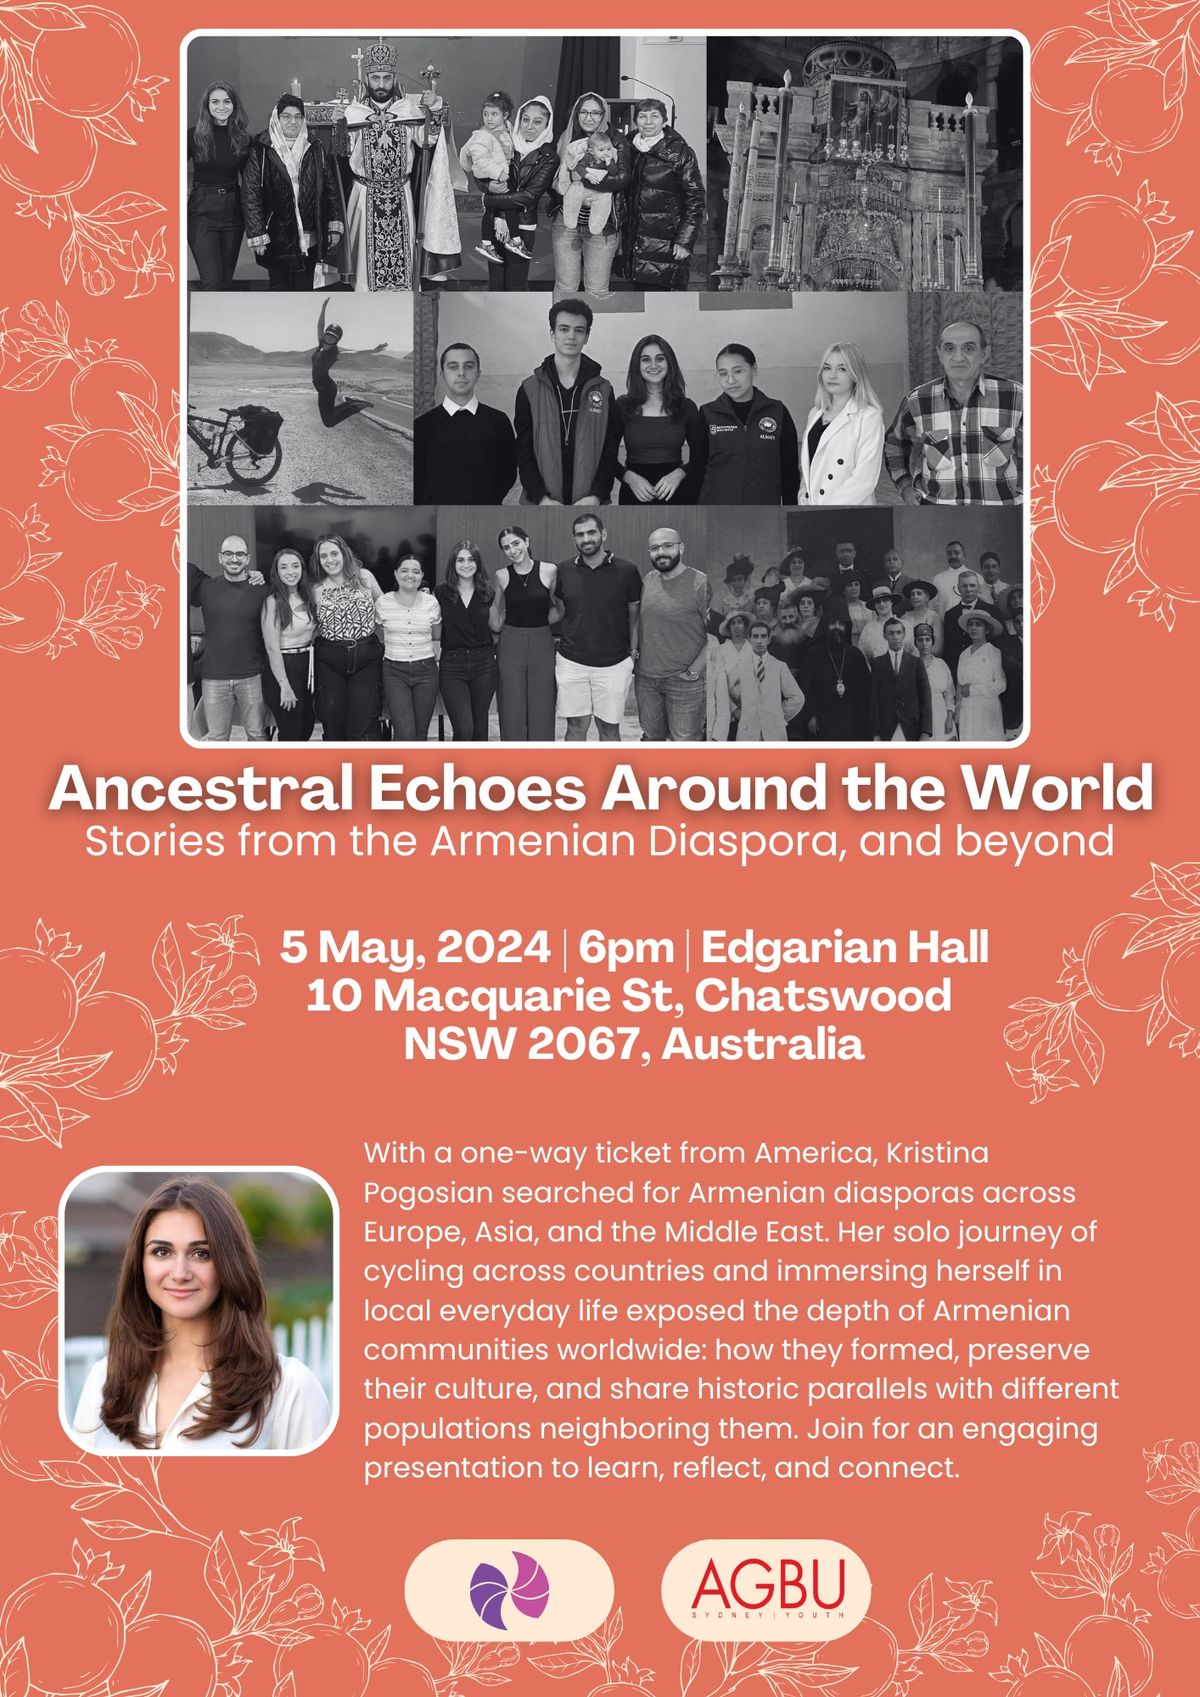 Ancestral Echoes Around the World: With Kristina Pogosian